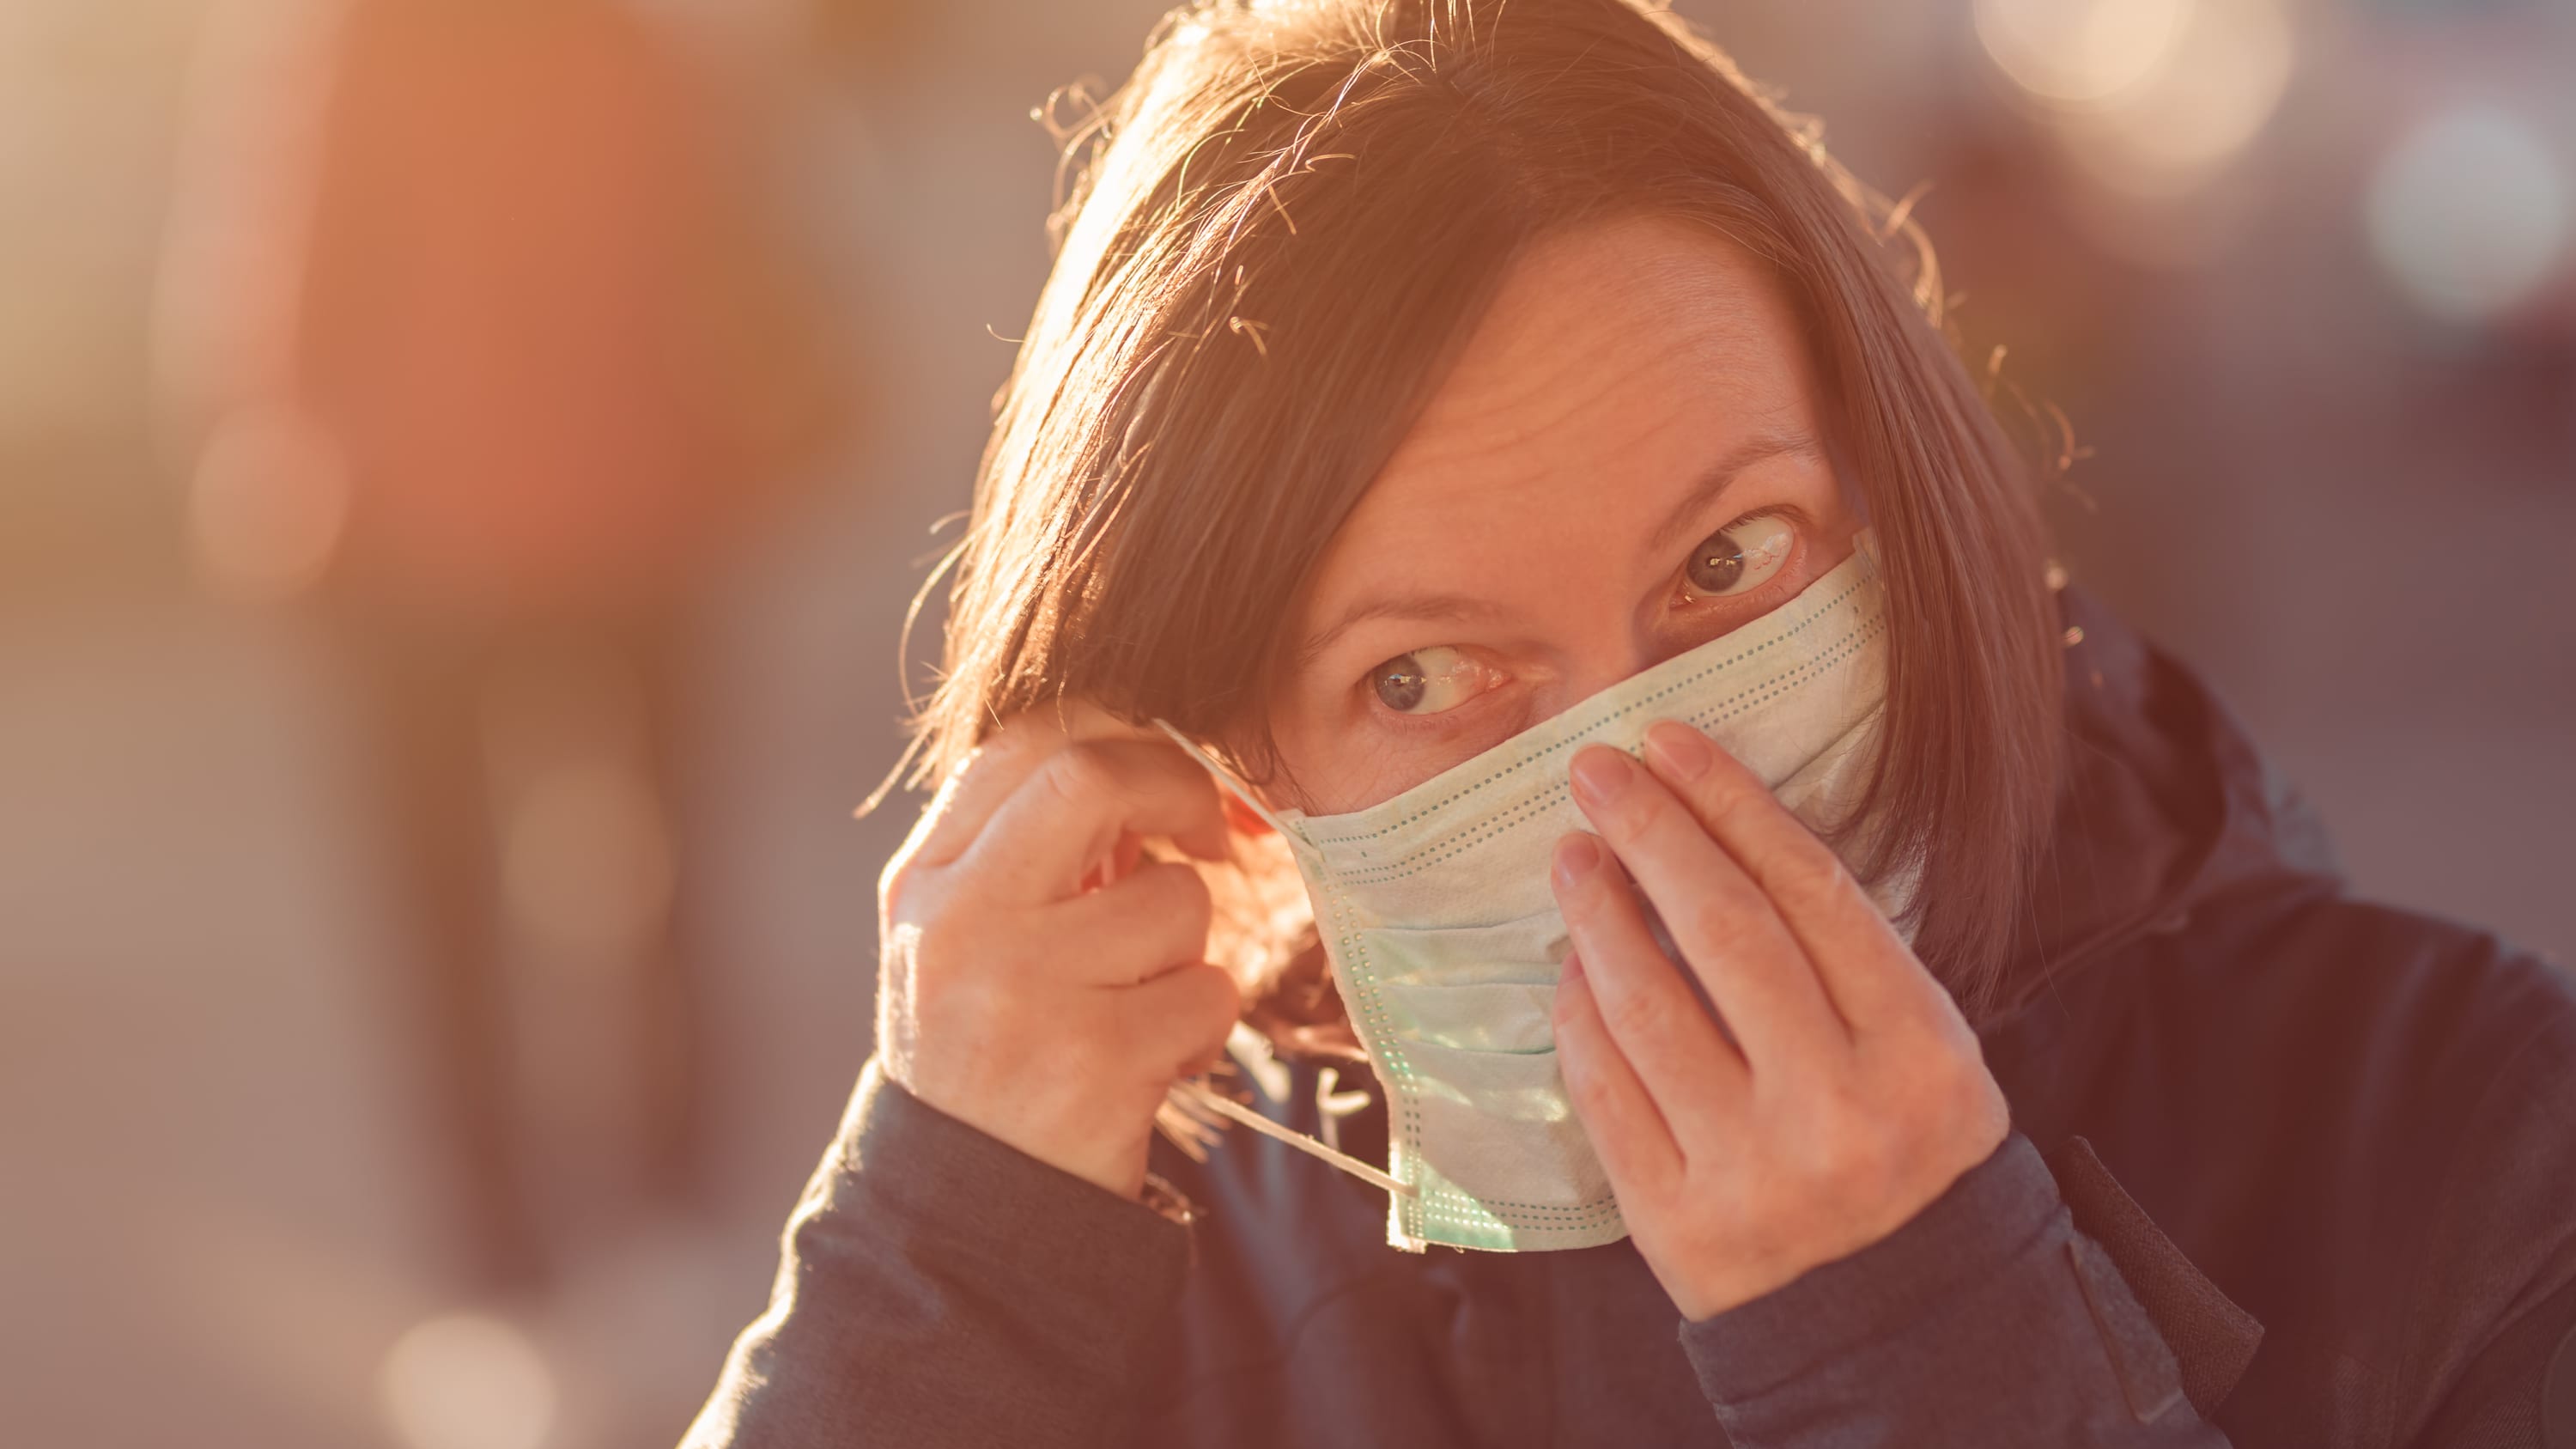 Woman with face protective mask standing on the street, possibly with post-COVID-19 symptoms